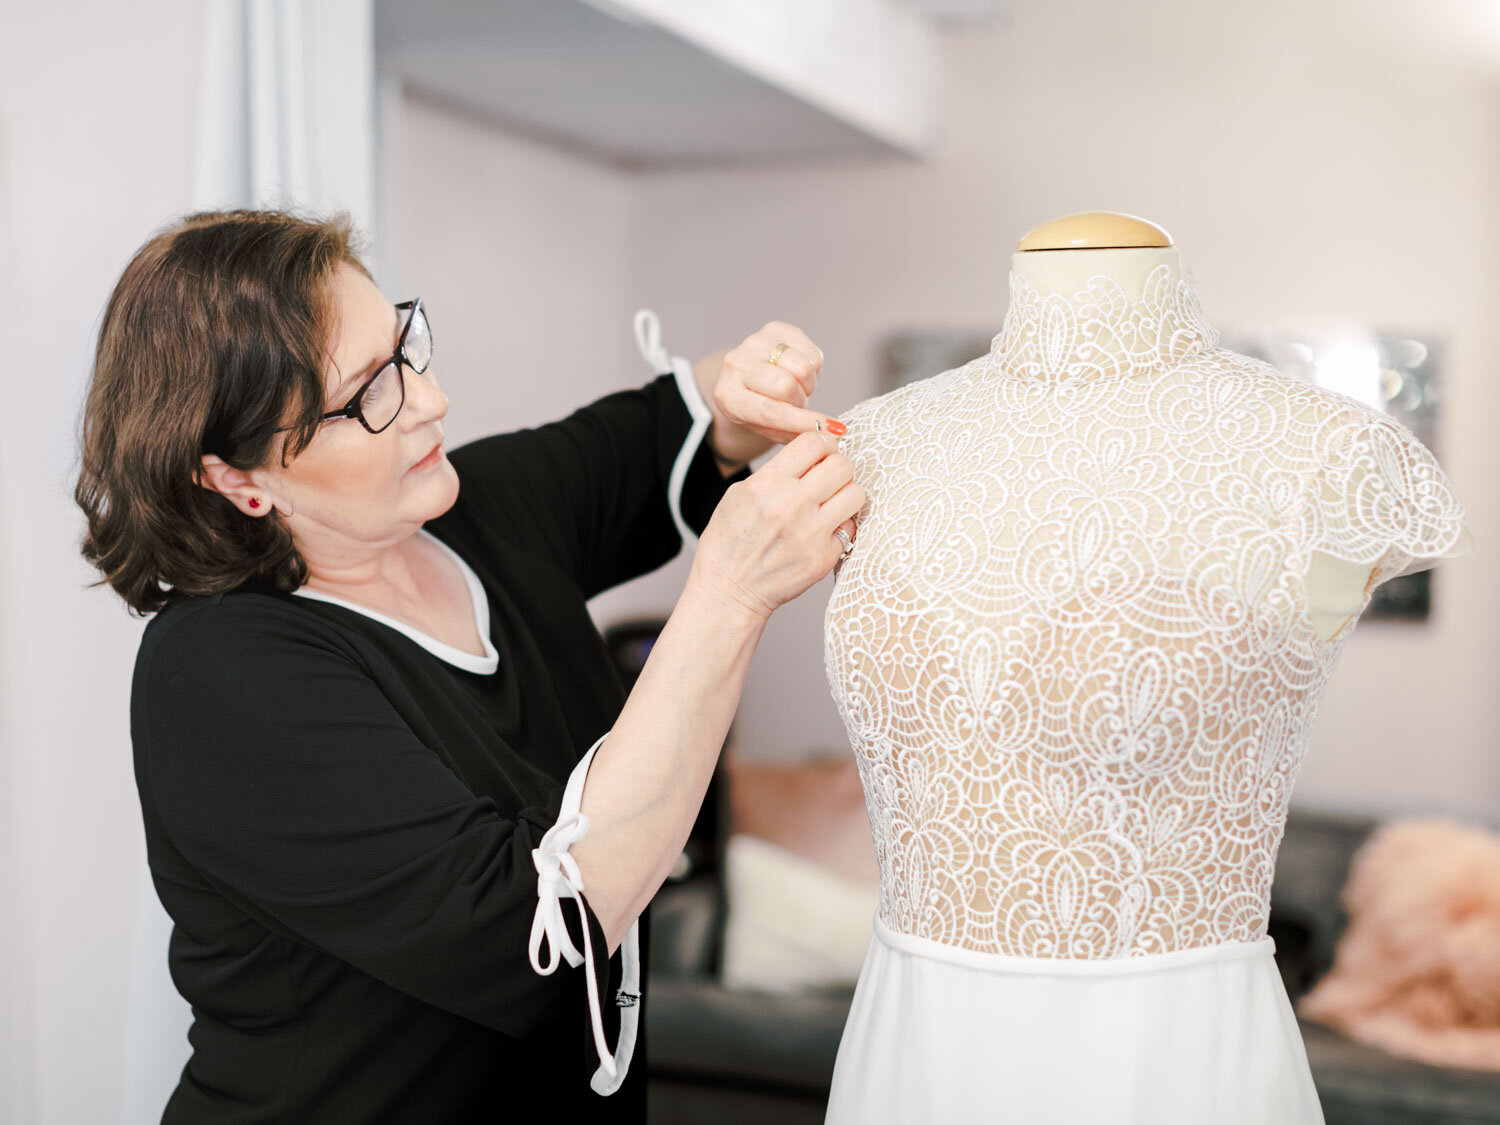 A Complete Guide to Wedding Alterations  Sponsored  Sponsored Content   Pittsburgh  Pittsburgh City Paper